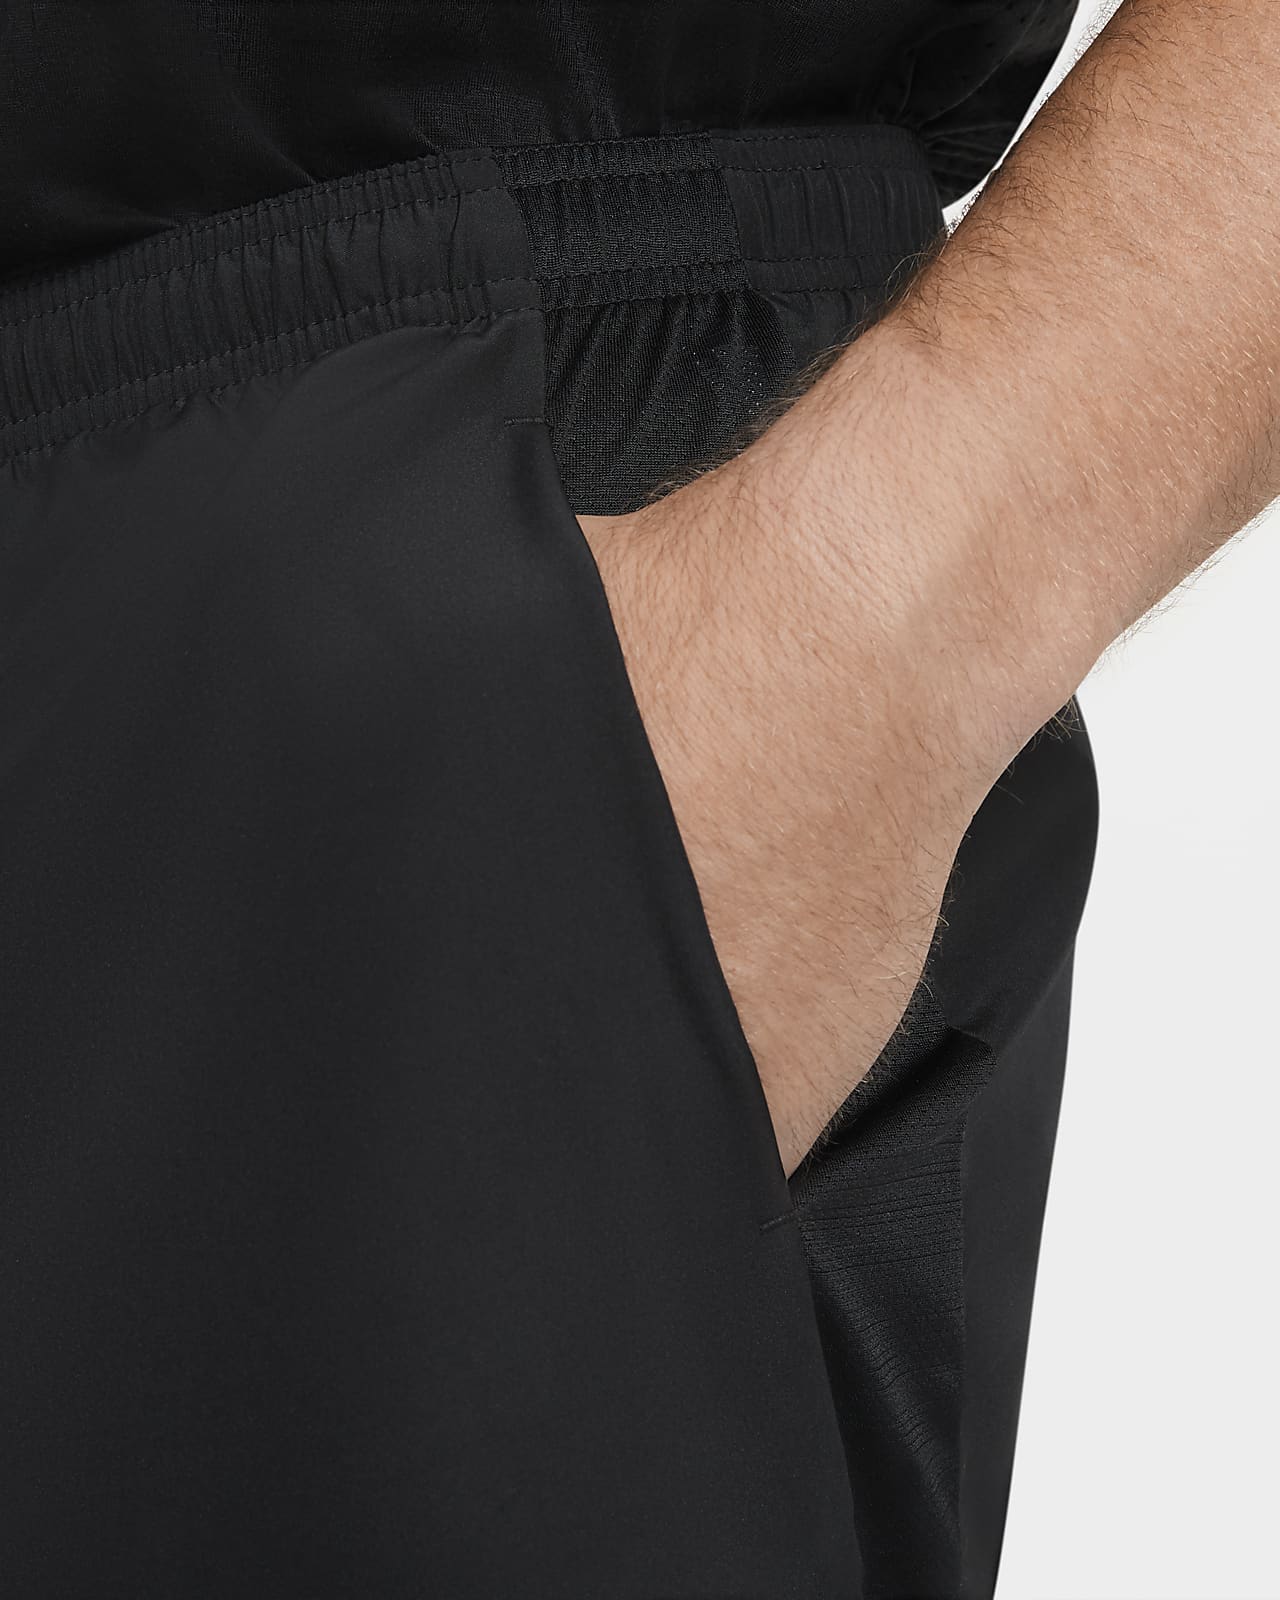 nike 7in challenge shorts mens